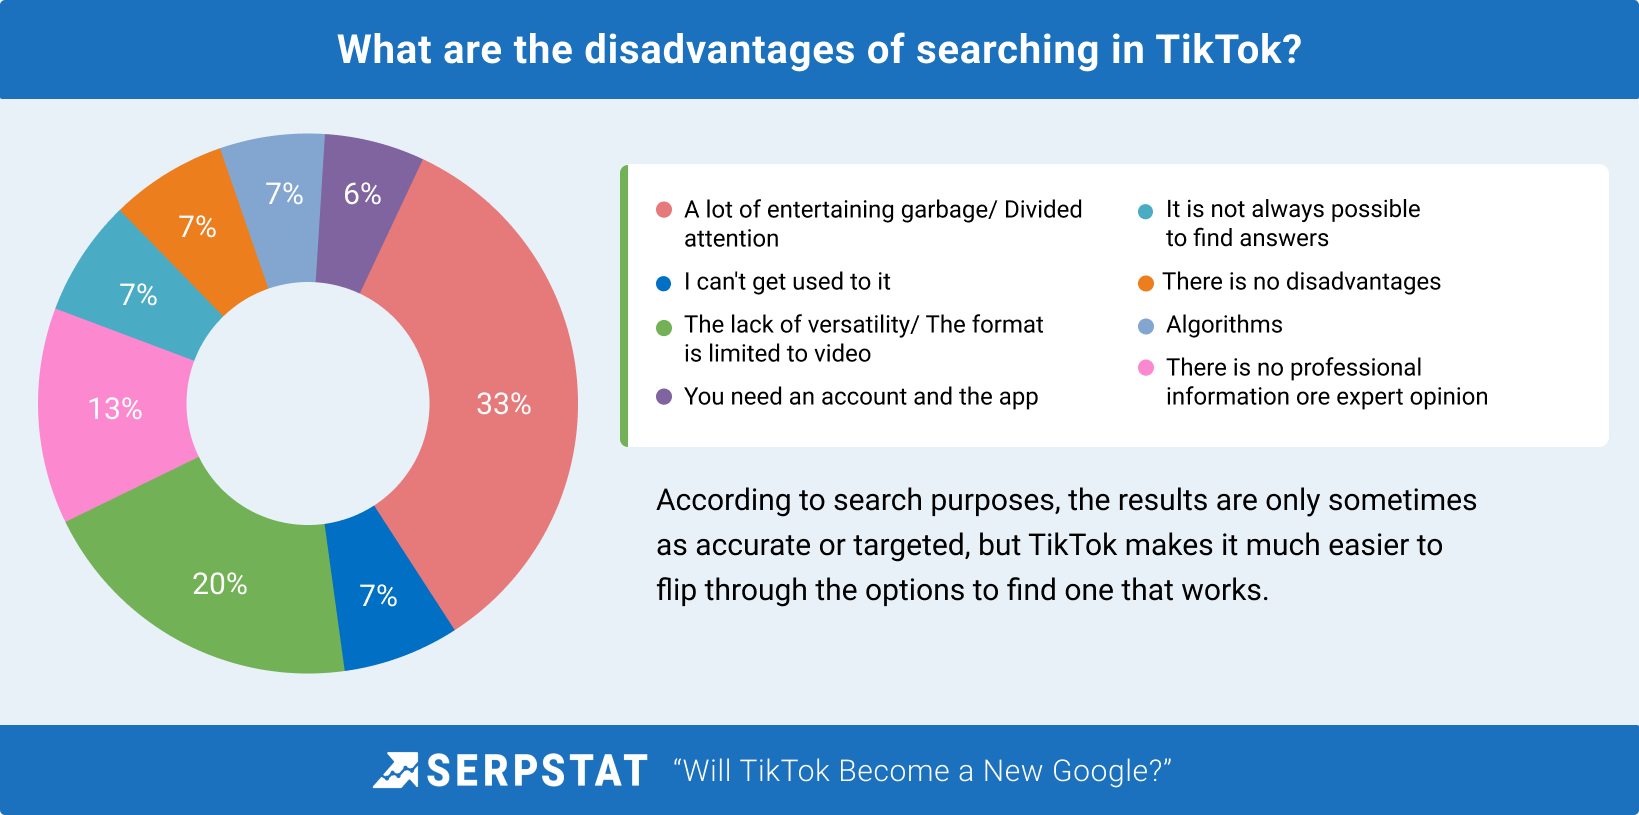 Disadvantages of TikTok for search